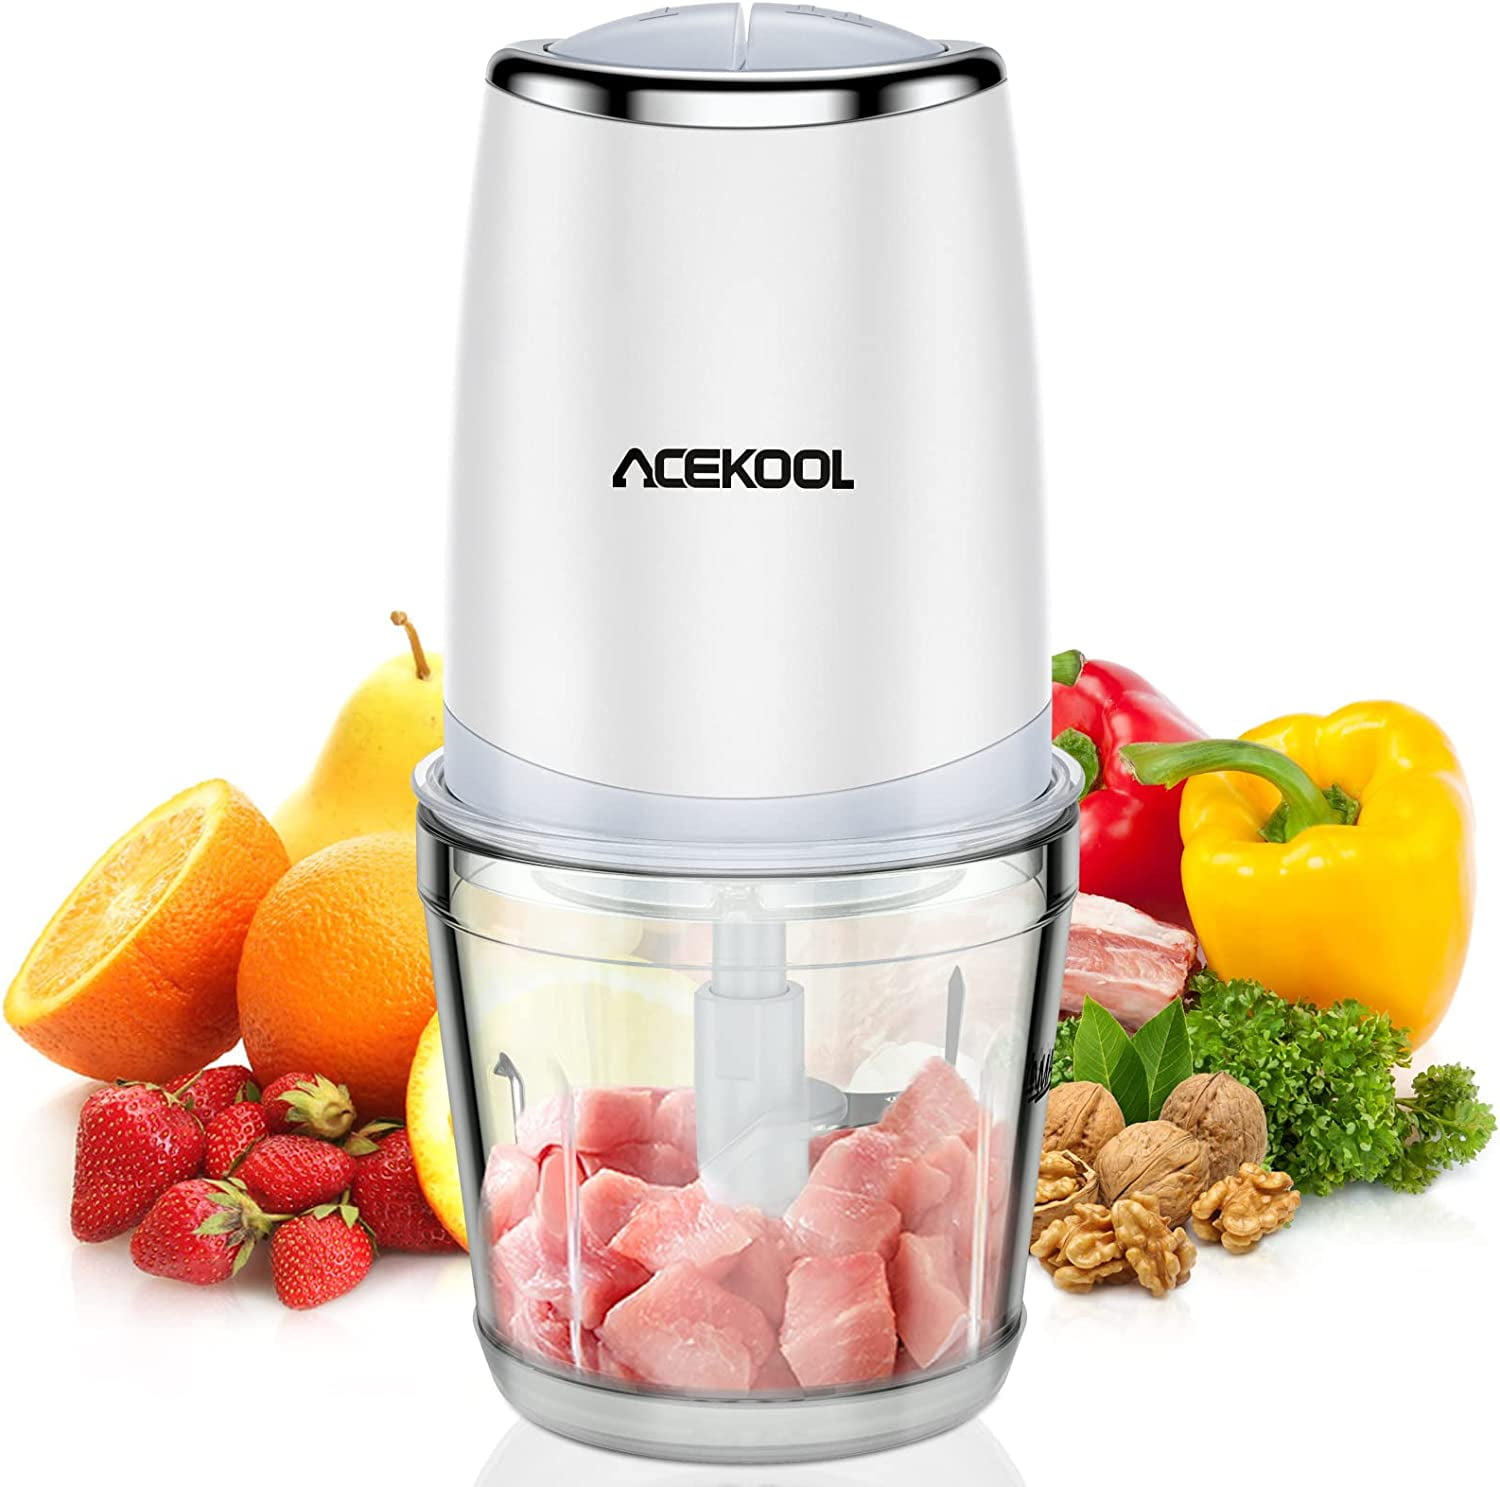 LINKChef Food Chopper, 5 Cup Food Processor Mini Electric, 1.2L 250W Meat  Grinder with 4 Bi-Level Blades, Stainless Steel Mincer for Kitchen